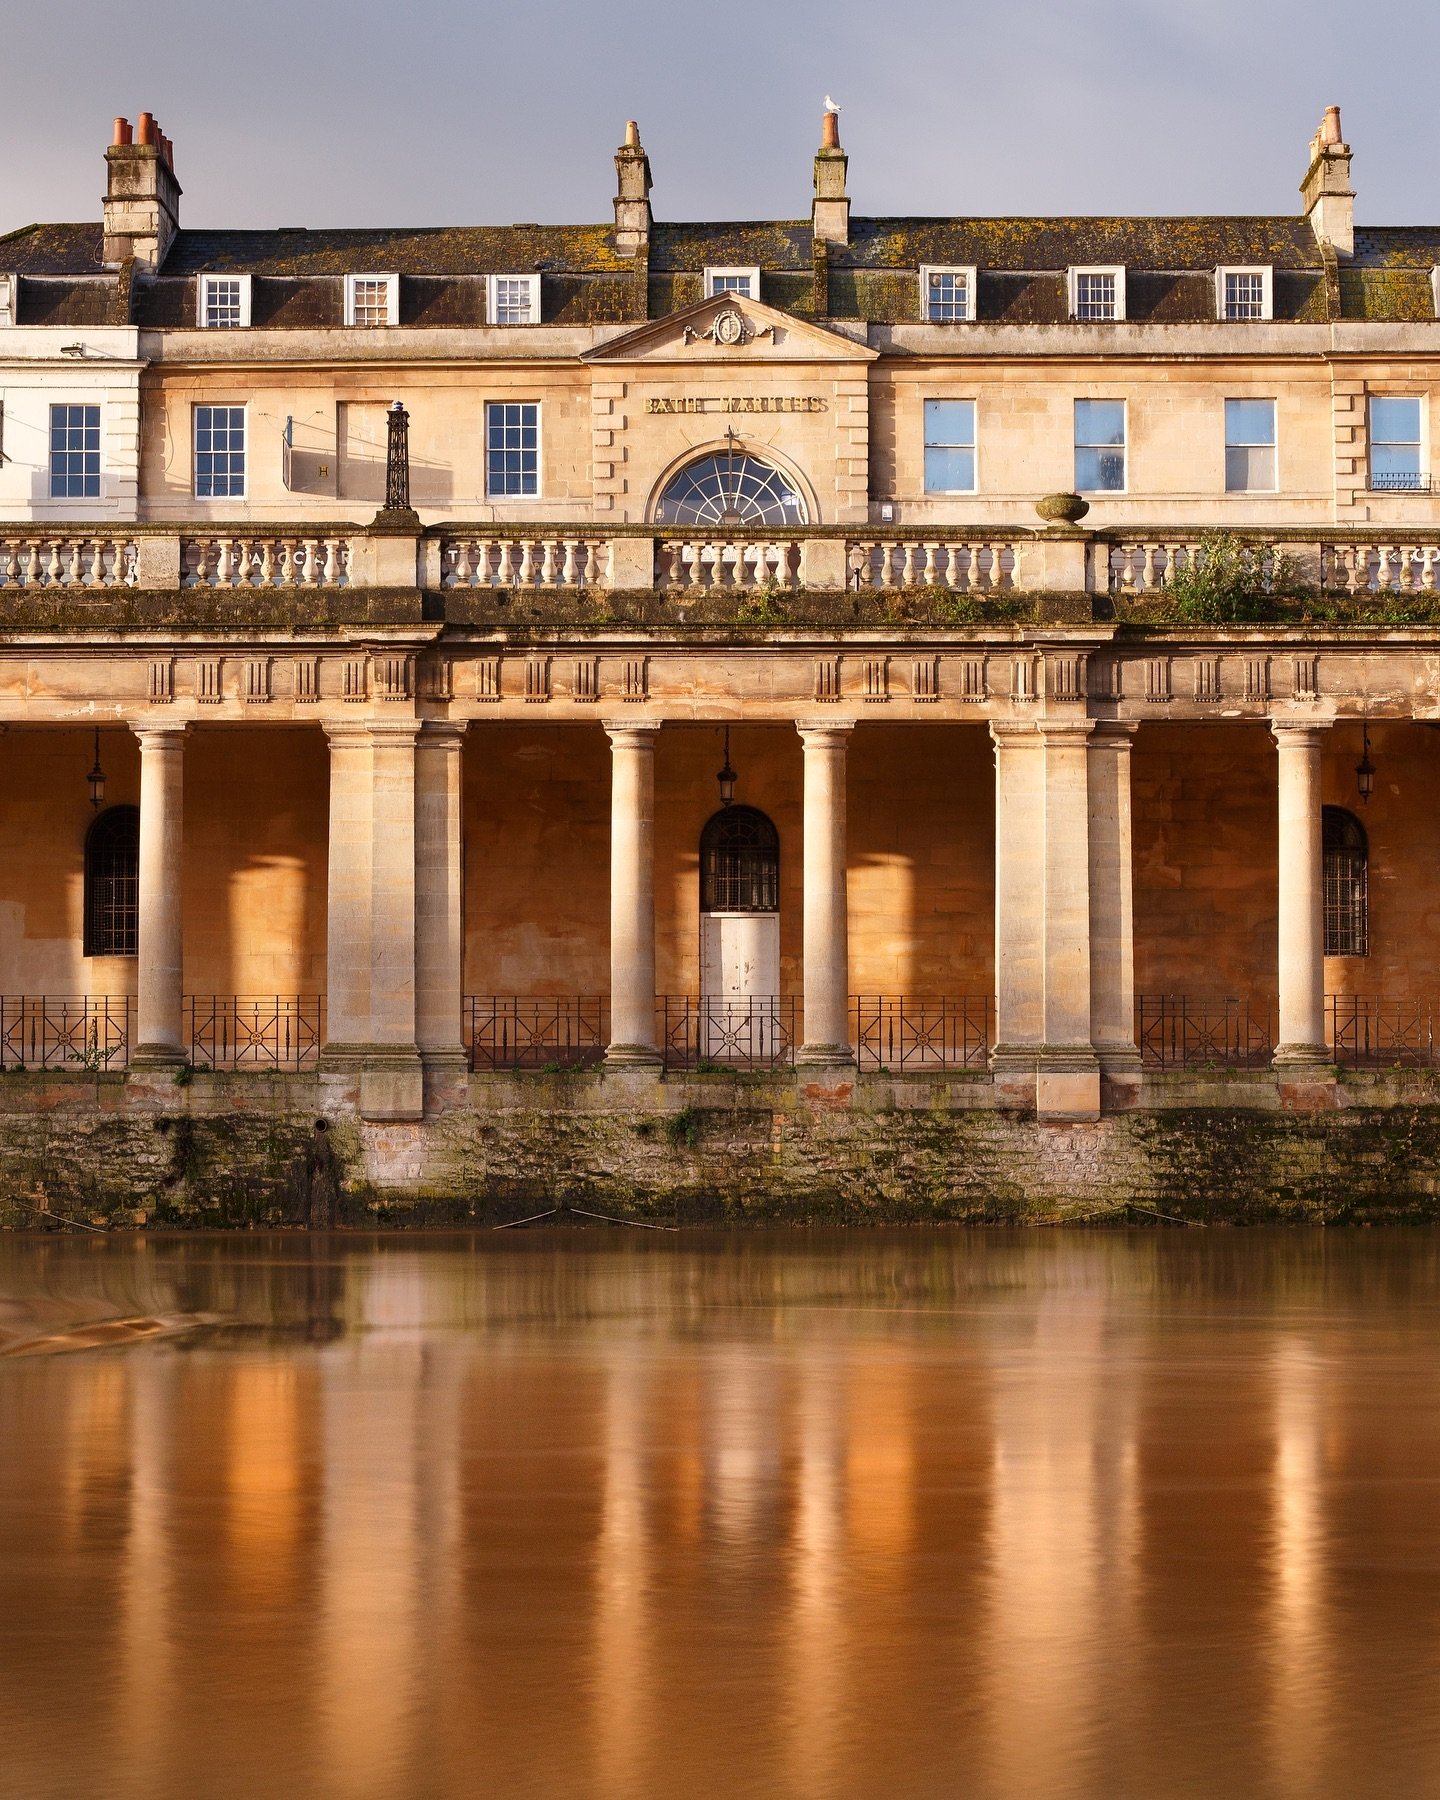 Down by the river and those views of beautiful Bath take on a whole new dimension&hellip;

Honey coloured stonework and slender columns create the perfect focal point for reflecting in the waters below and this spot, nestled between The Empire and Pu